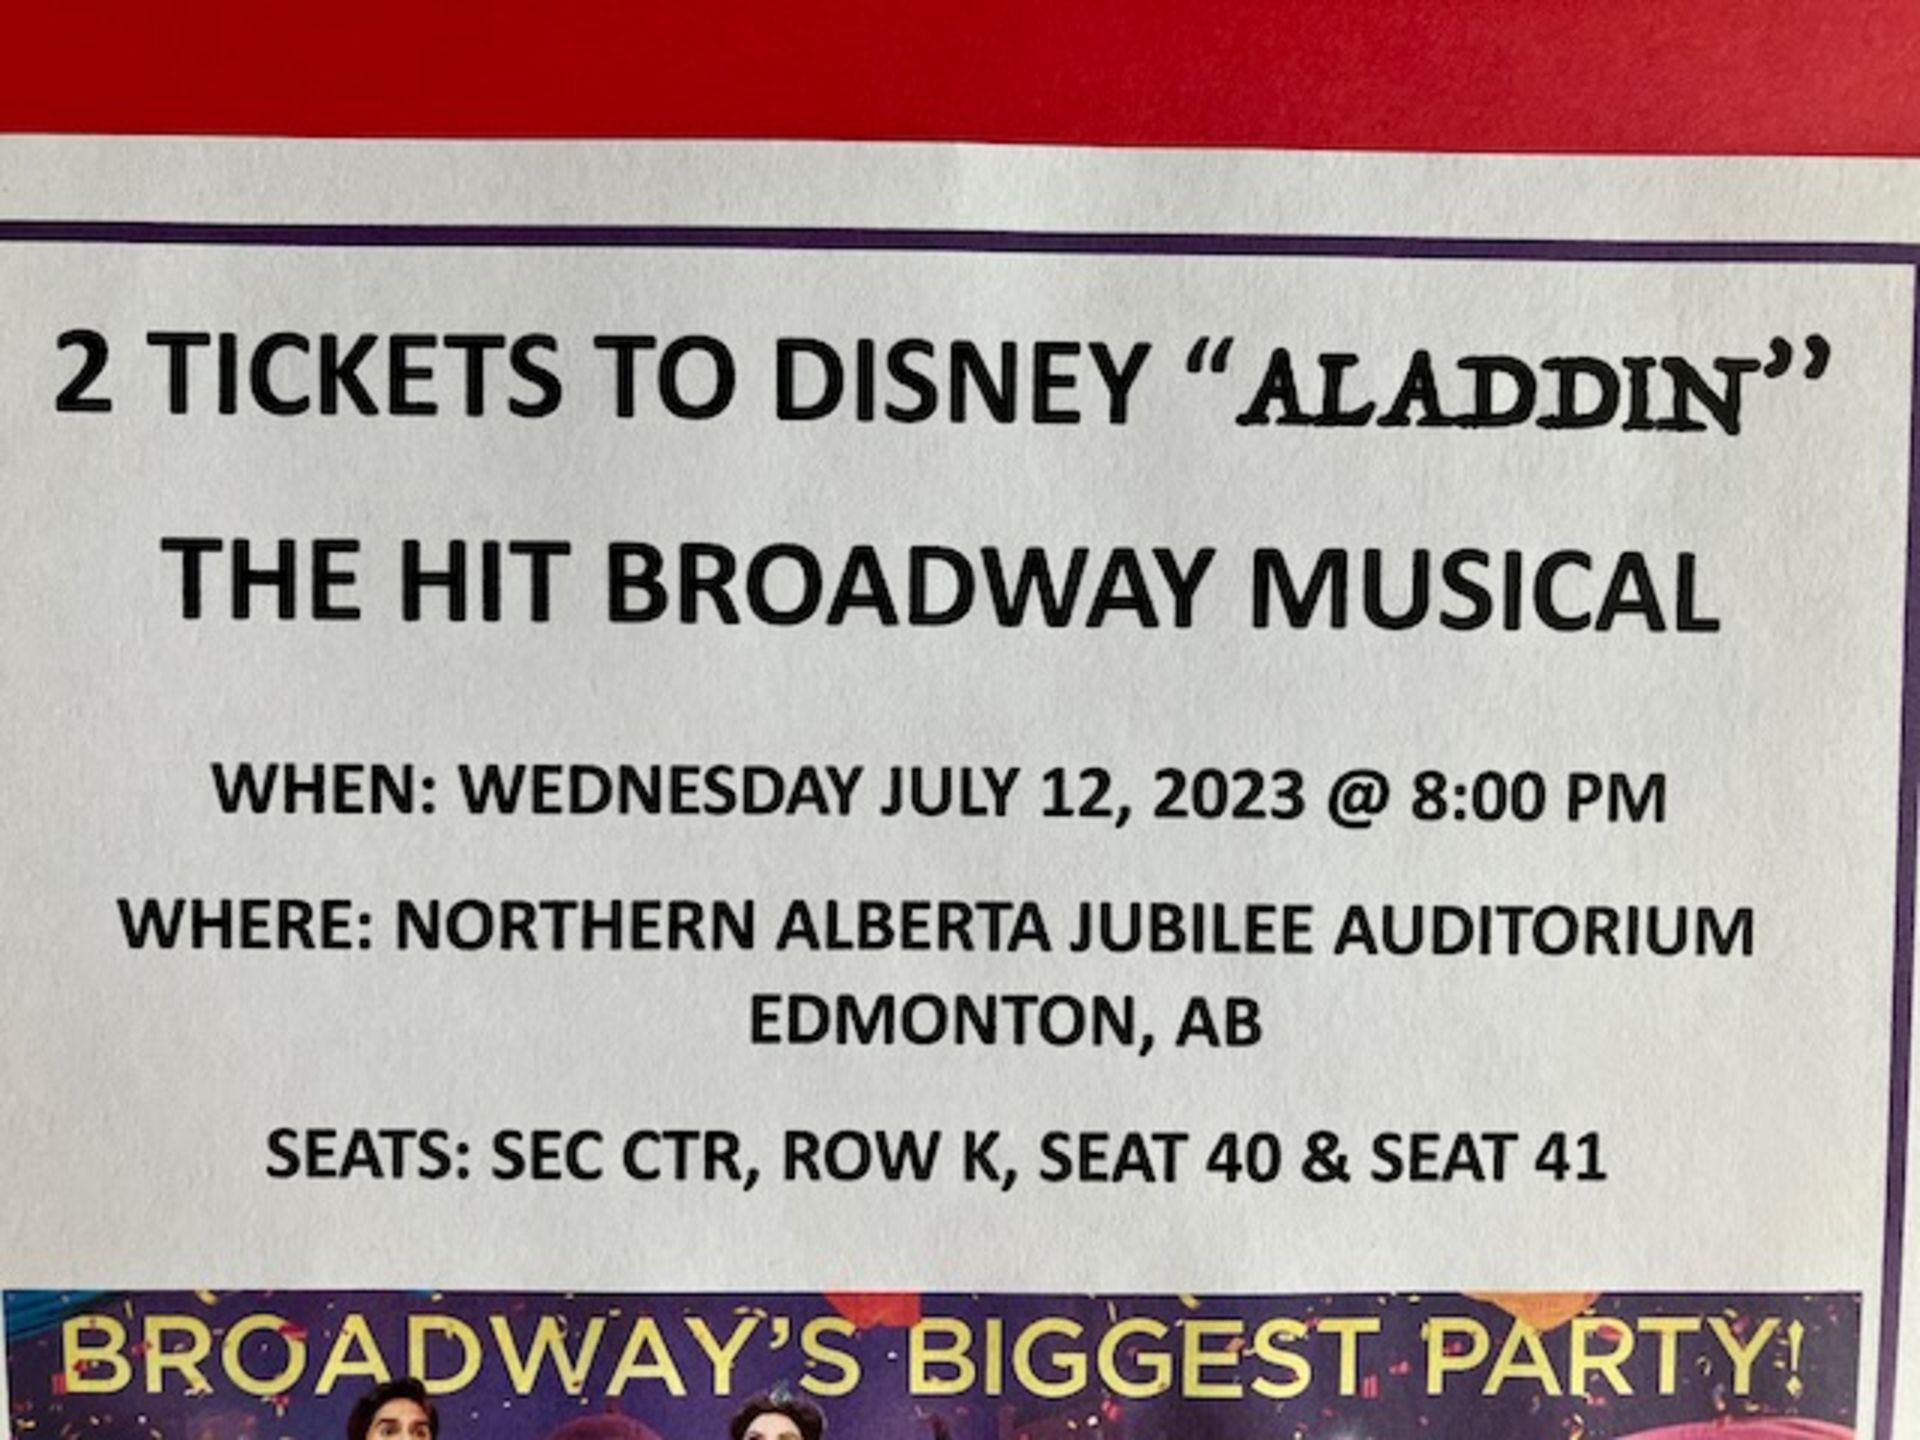 2 TICKETS TO DISNEY "ALADDIN" BROADWAY MUSICAL - Image 2 of 2